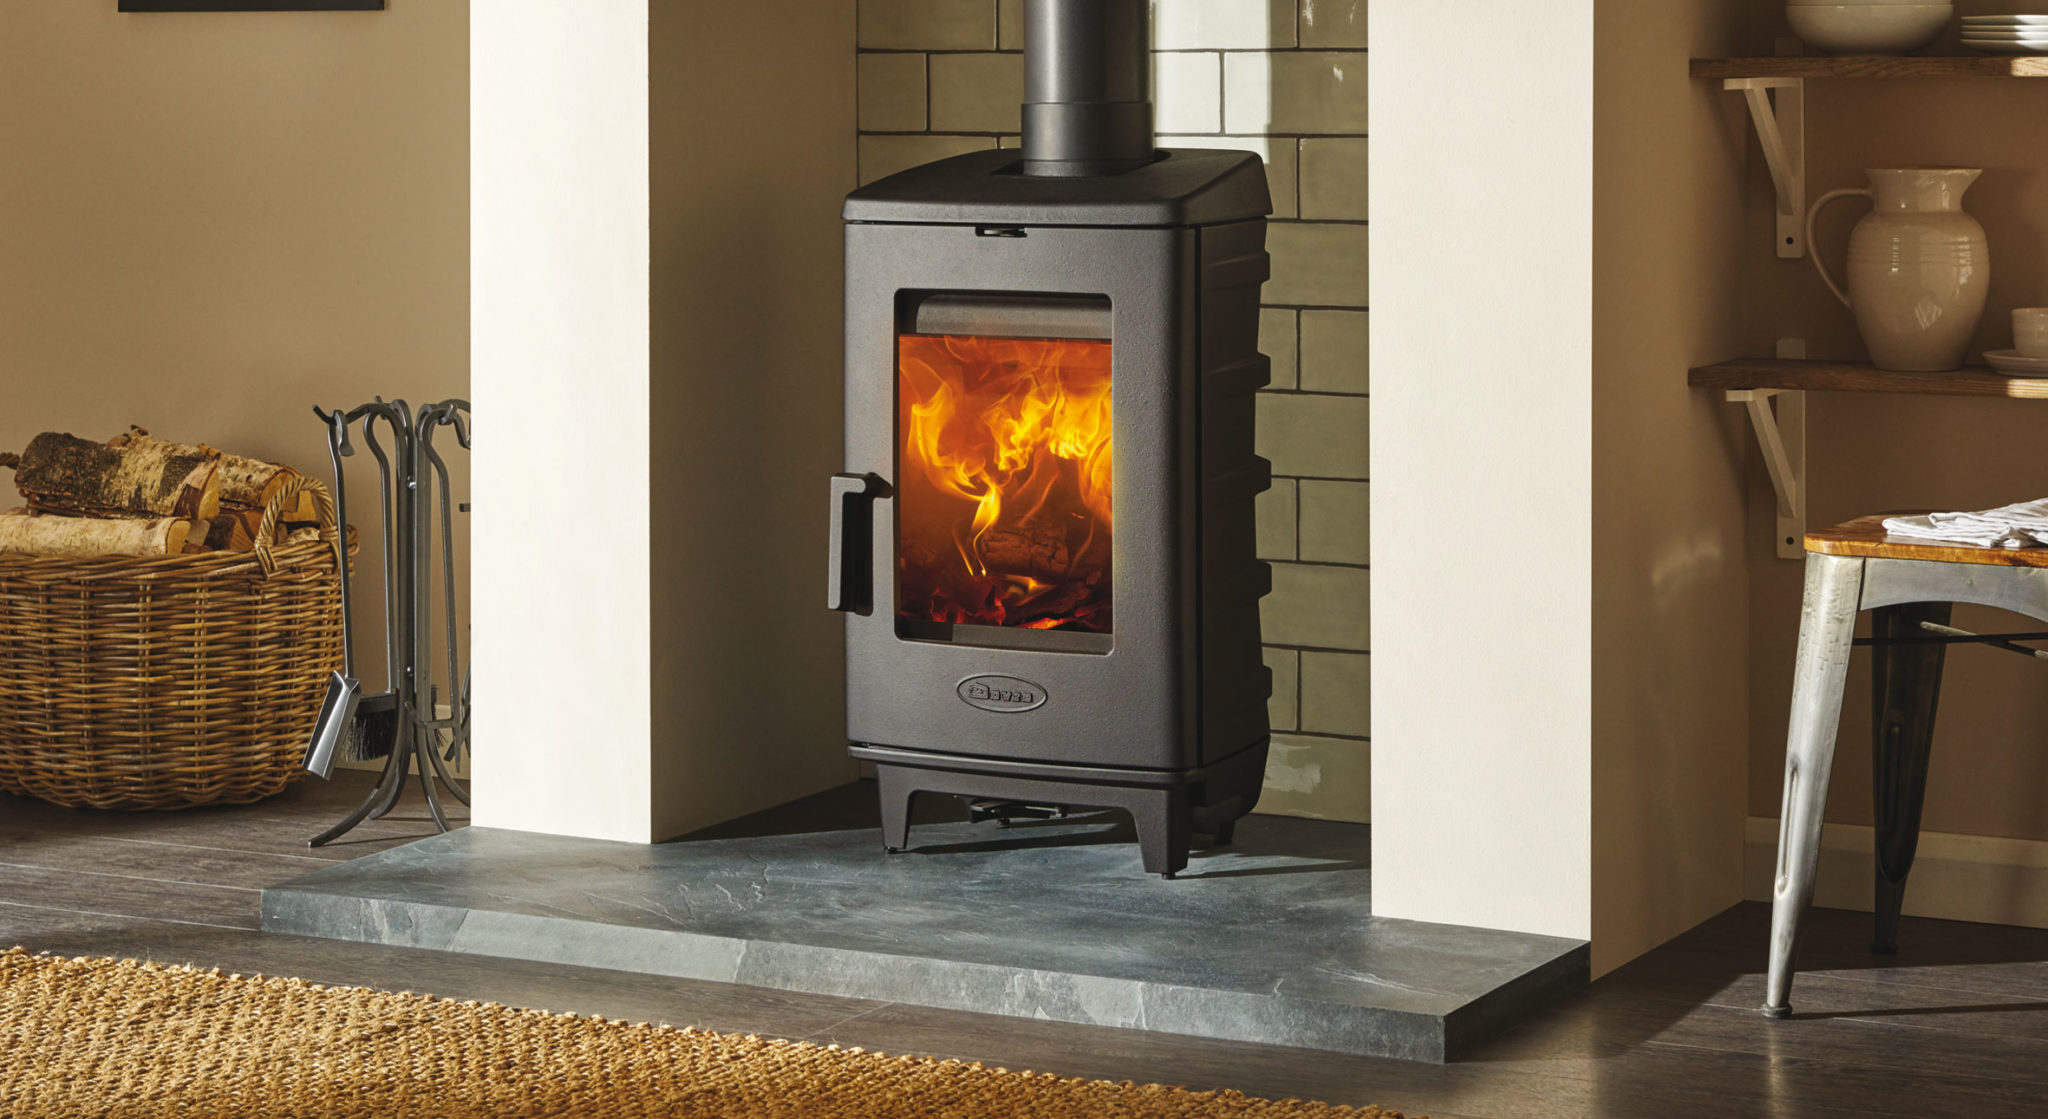 Brut – A Designer Wood Burning Stove With Advanced Heating Technology